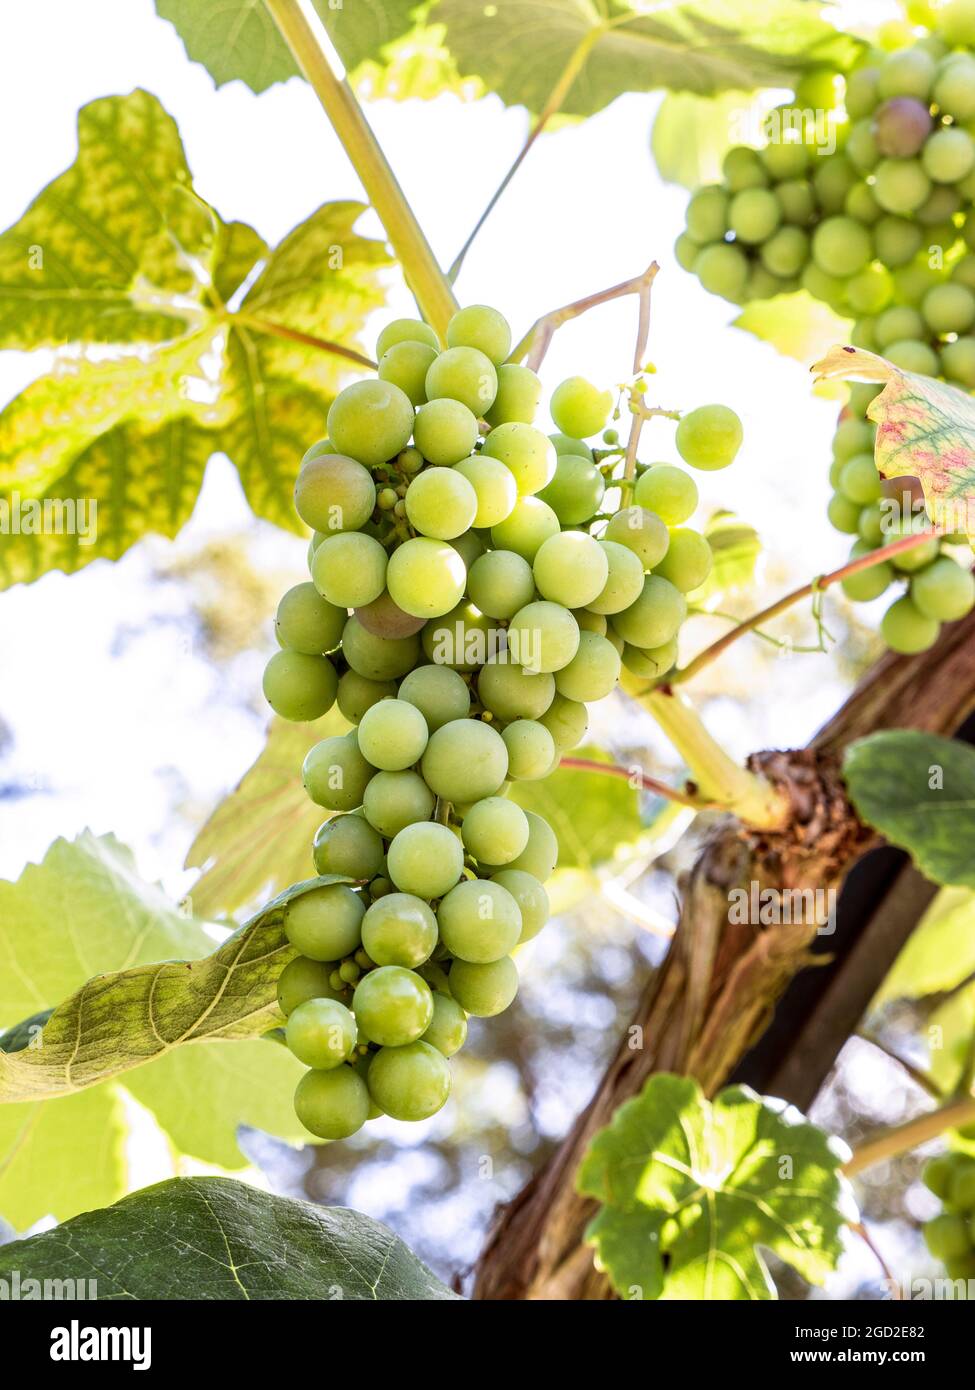 Schuyler Grapes ripening on the vine in perfect sunny conditions Schuyler ripening bunch of grapes, hybrid wine & table grape Stock Photo